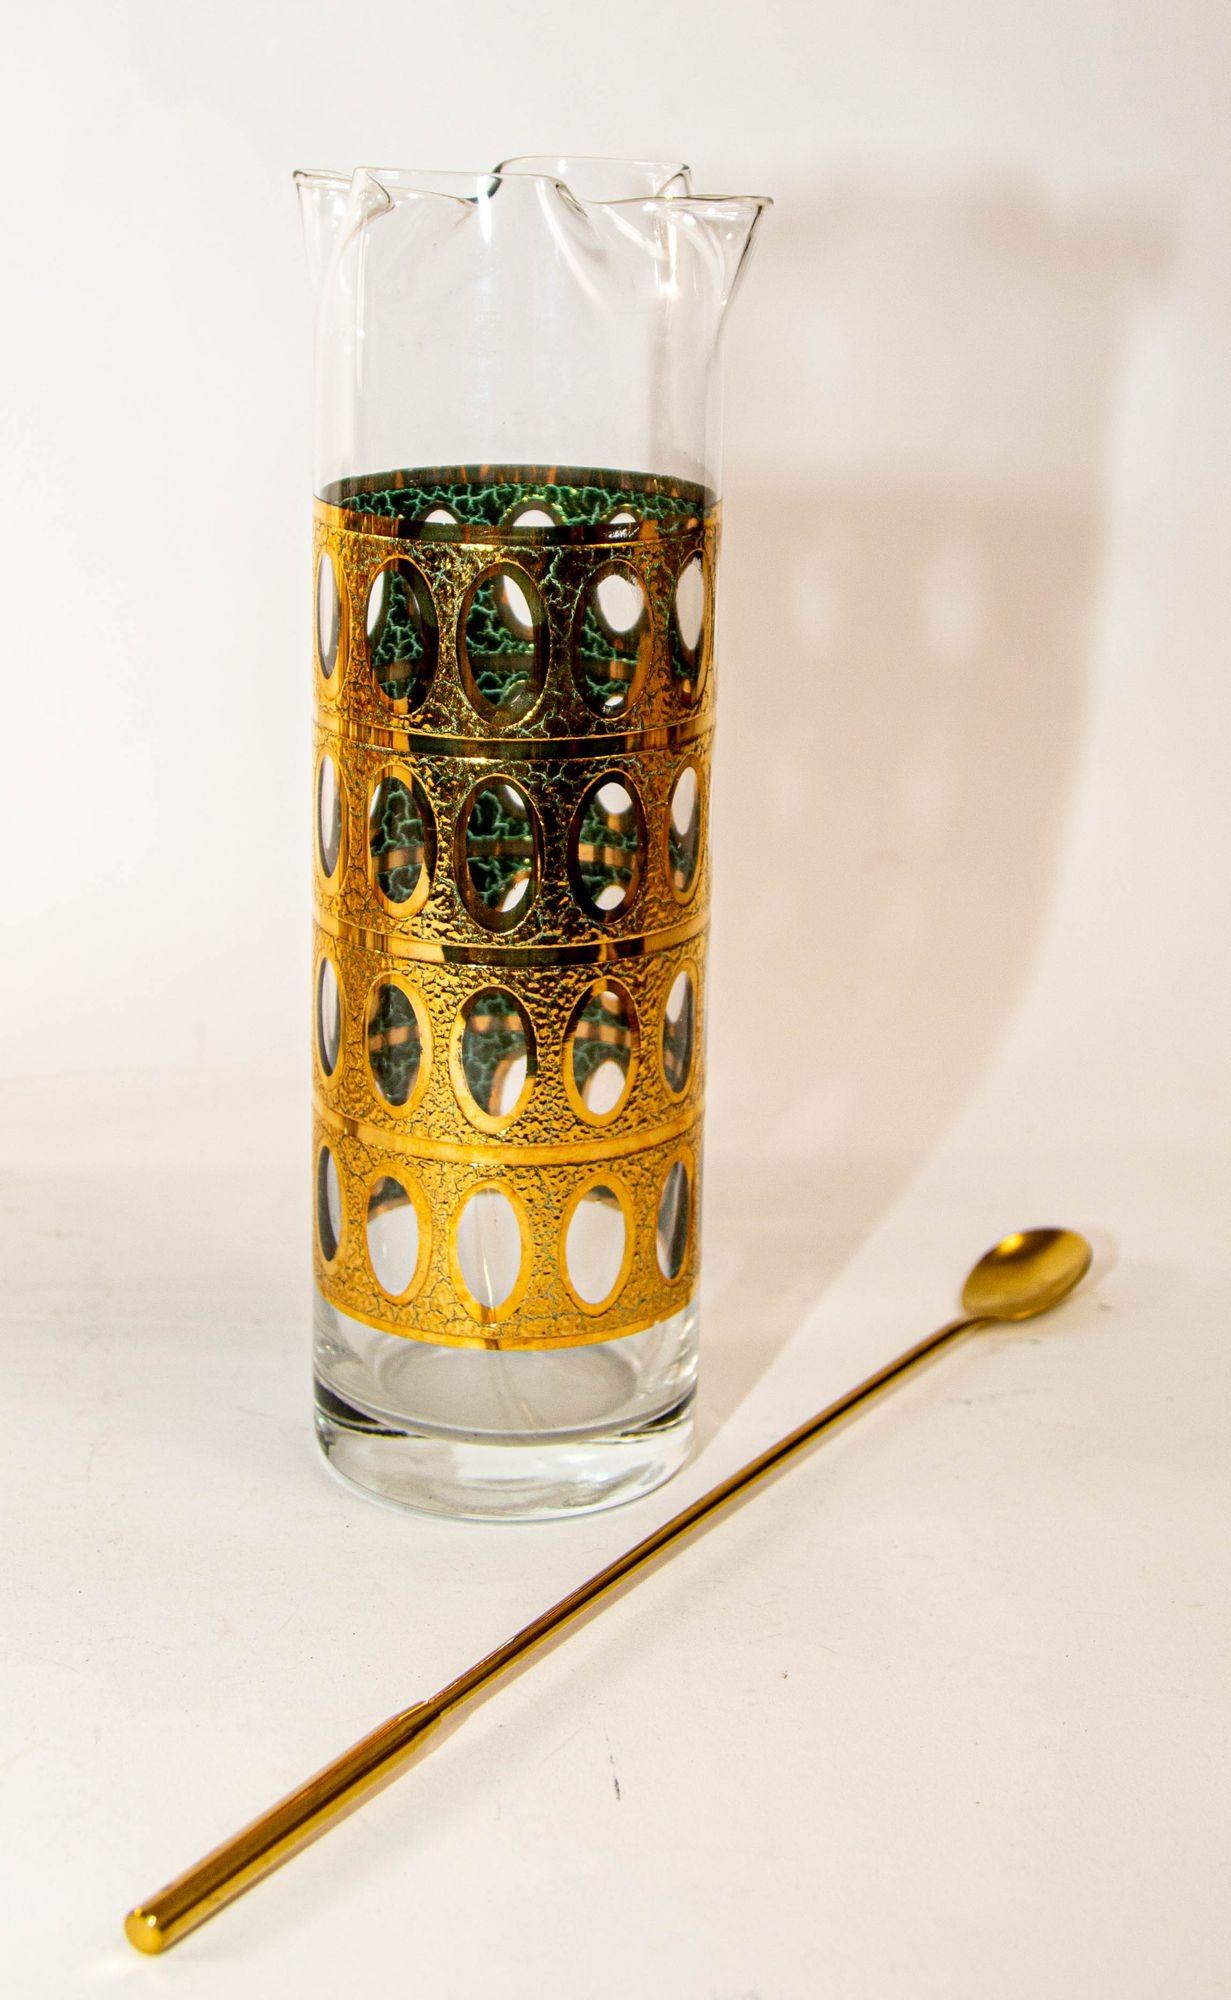 1960s Vintage, Culver Ltd Double-Spouted Cocktail Pitcher in the Pisa Pattern in 22 Karat Gold.
Mid-Century modern cocktail pitcher by Culver Ltd. of cylindrical form with double pinched spouts.
Decorated in crackled 22k gold over translucent green